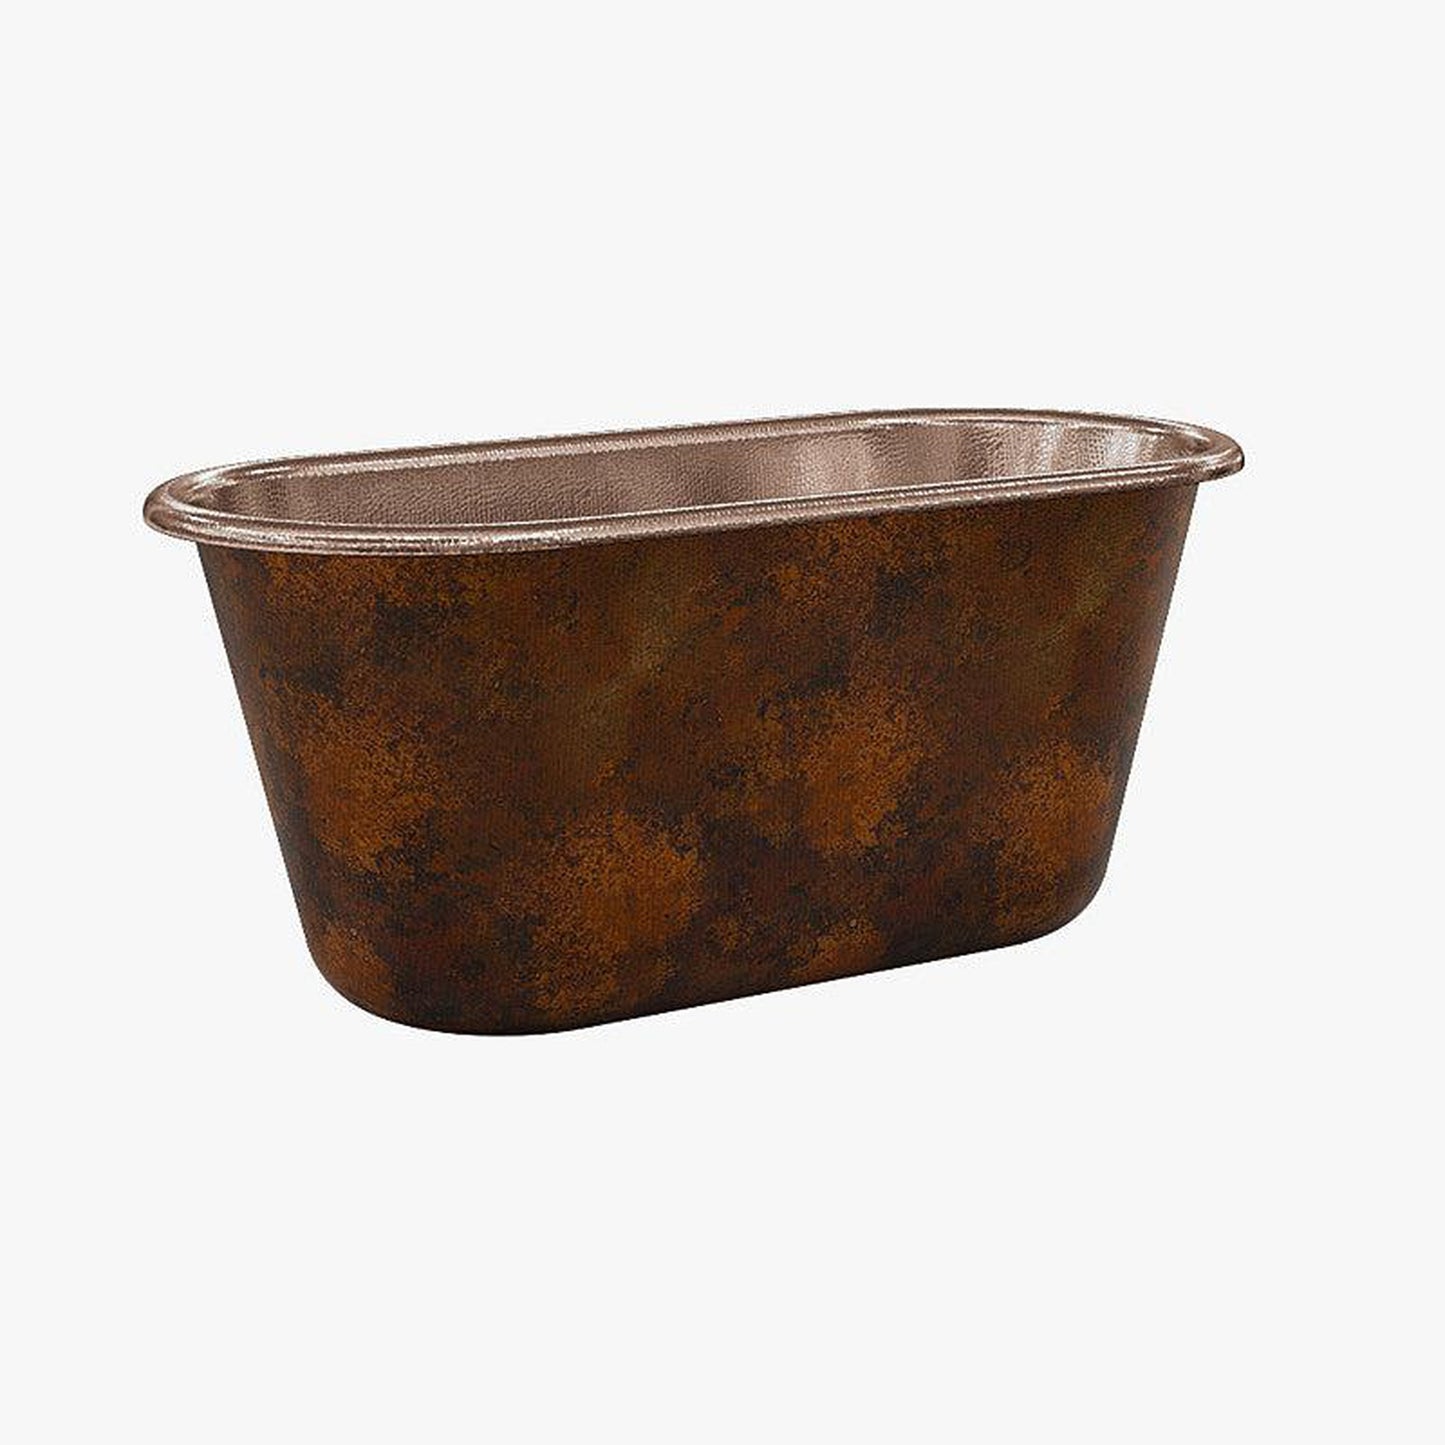 CopperSmith Heritage HX1 64" x 31" x 31" 14-Gauge Fire Copper Freestanding Bathtub With Polished Copper Interior and Brushed Nickel Lift & Turn Tub Drain and Polished Brass Tub Filler